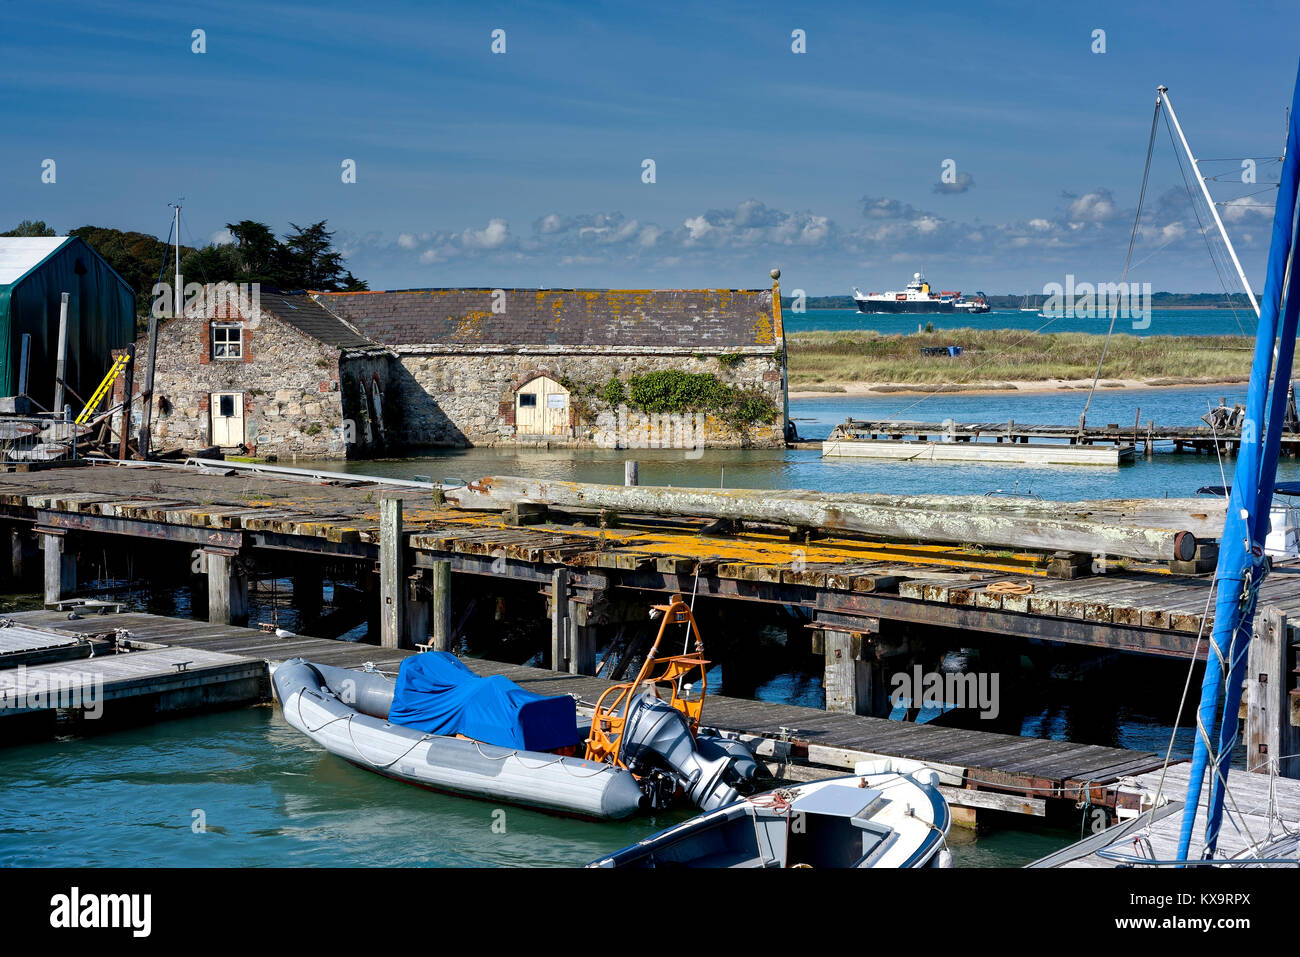 Hayles boat yard in Yarmouth Harbour on the Isle of Wight UK. Stock Photo